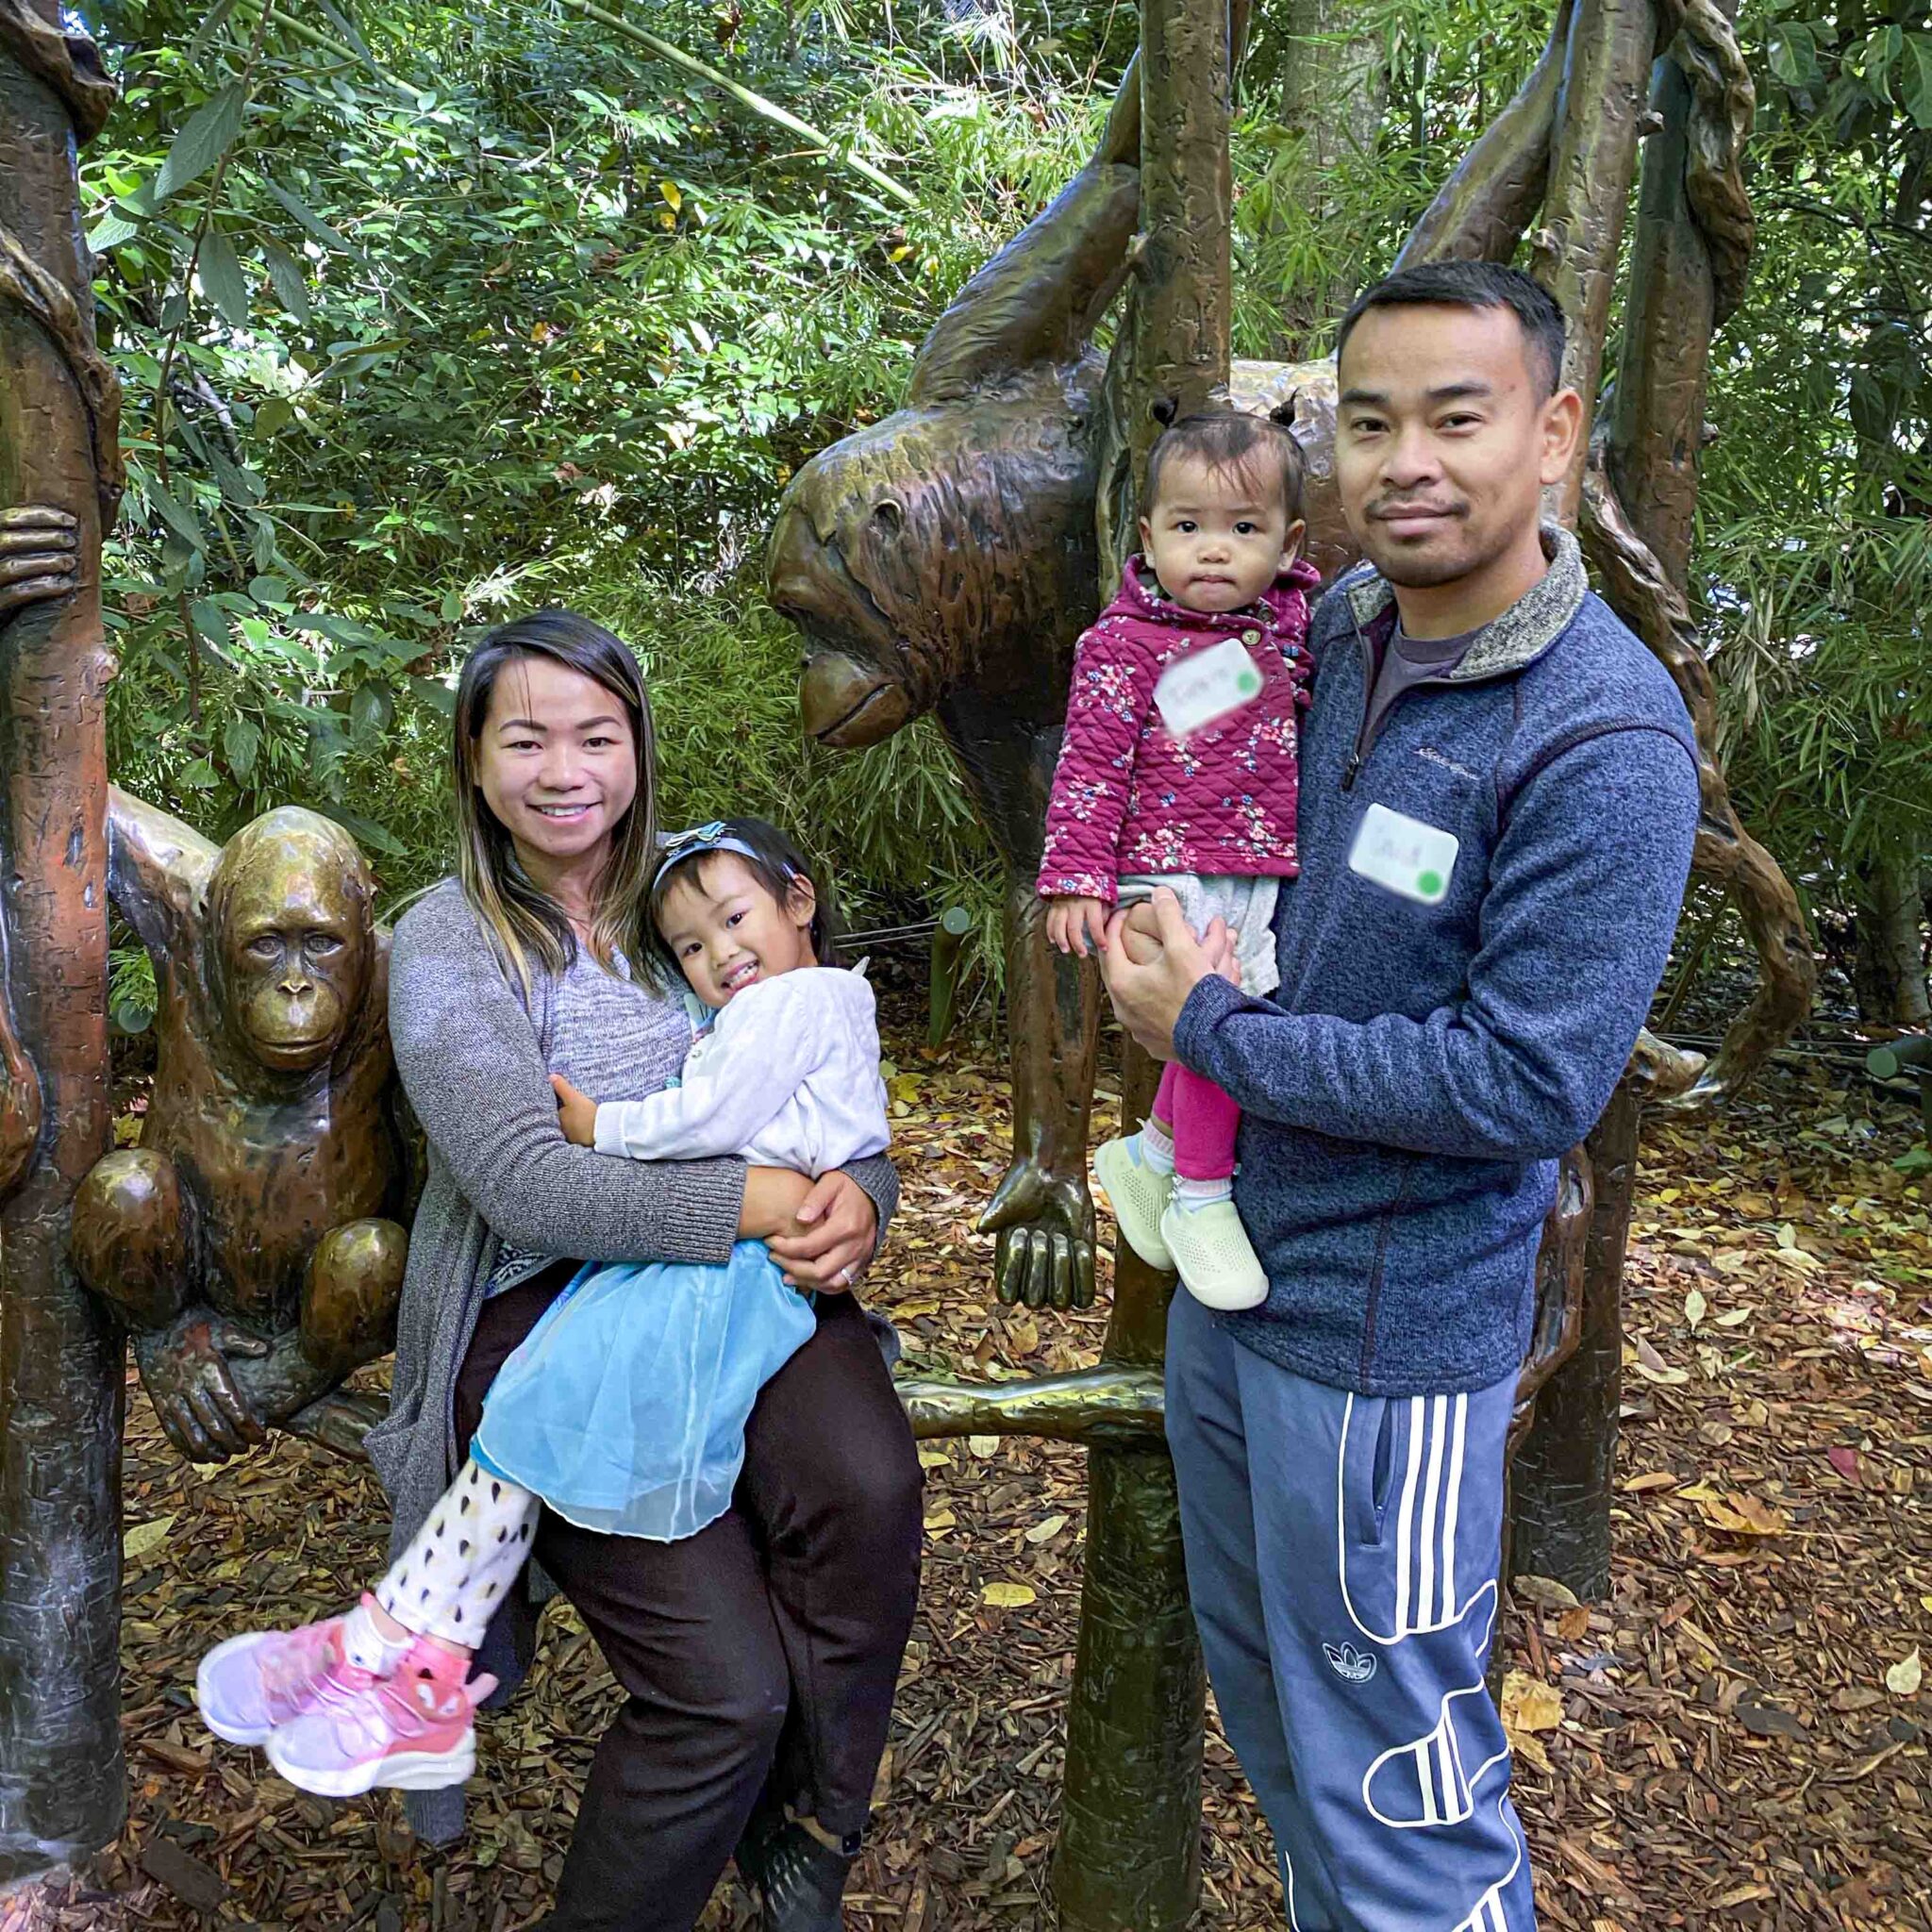 family group photo of two adults and two children standing/sitting in front of a sculpture inside a wooded zoo exhibit.